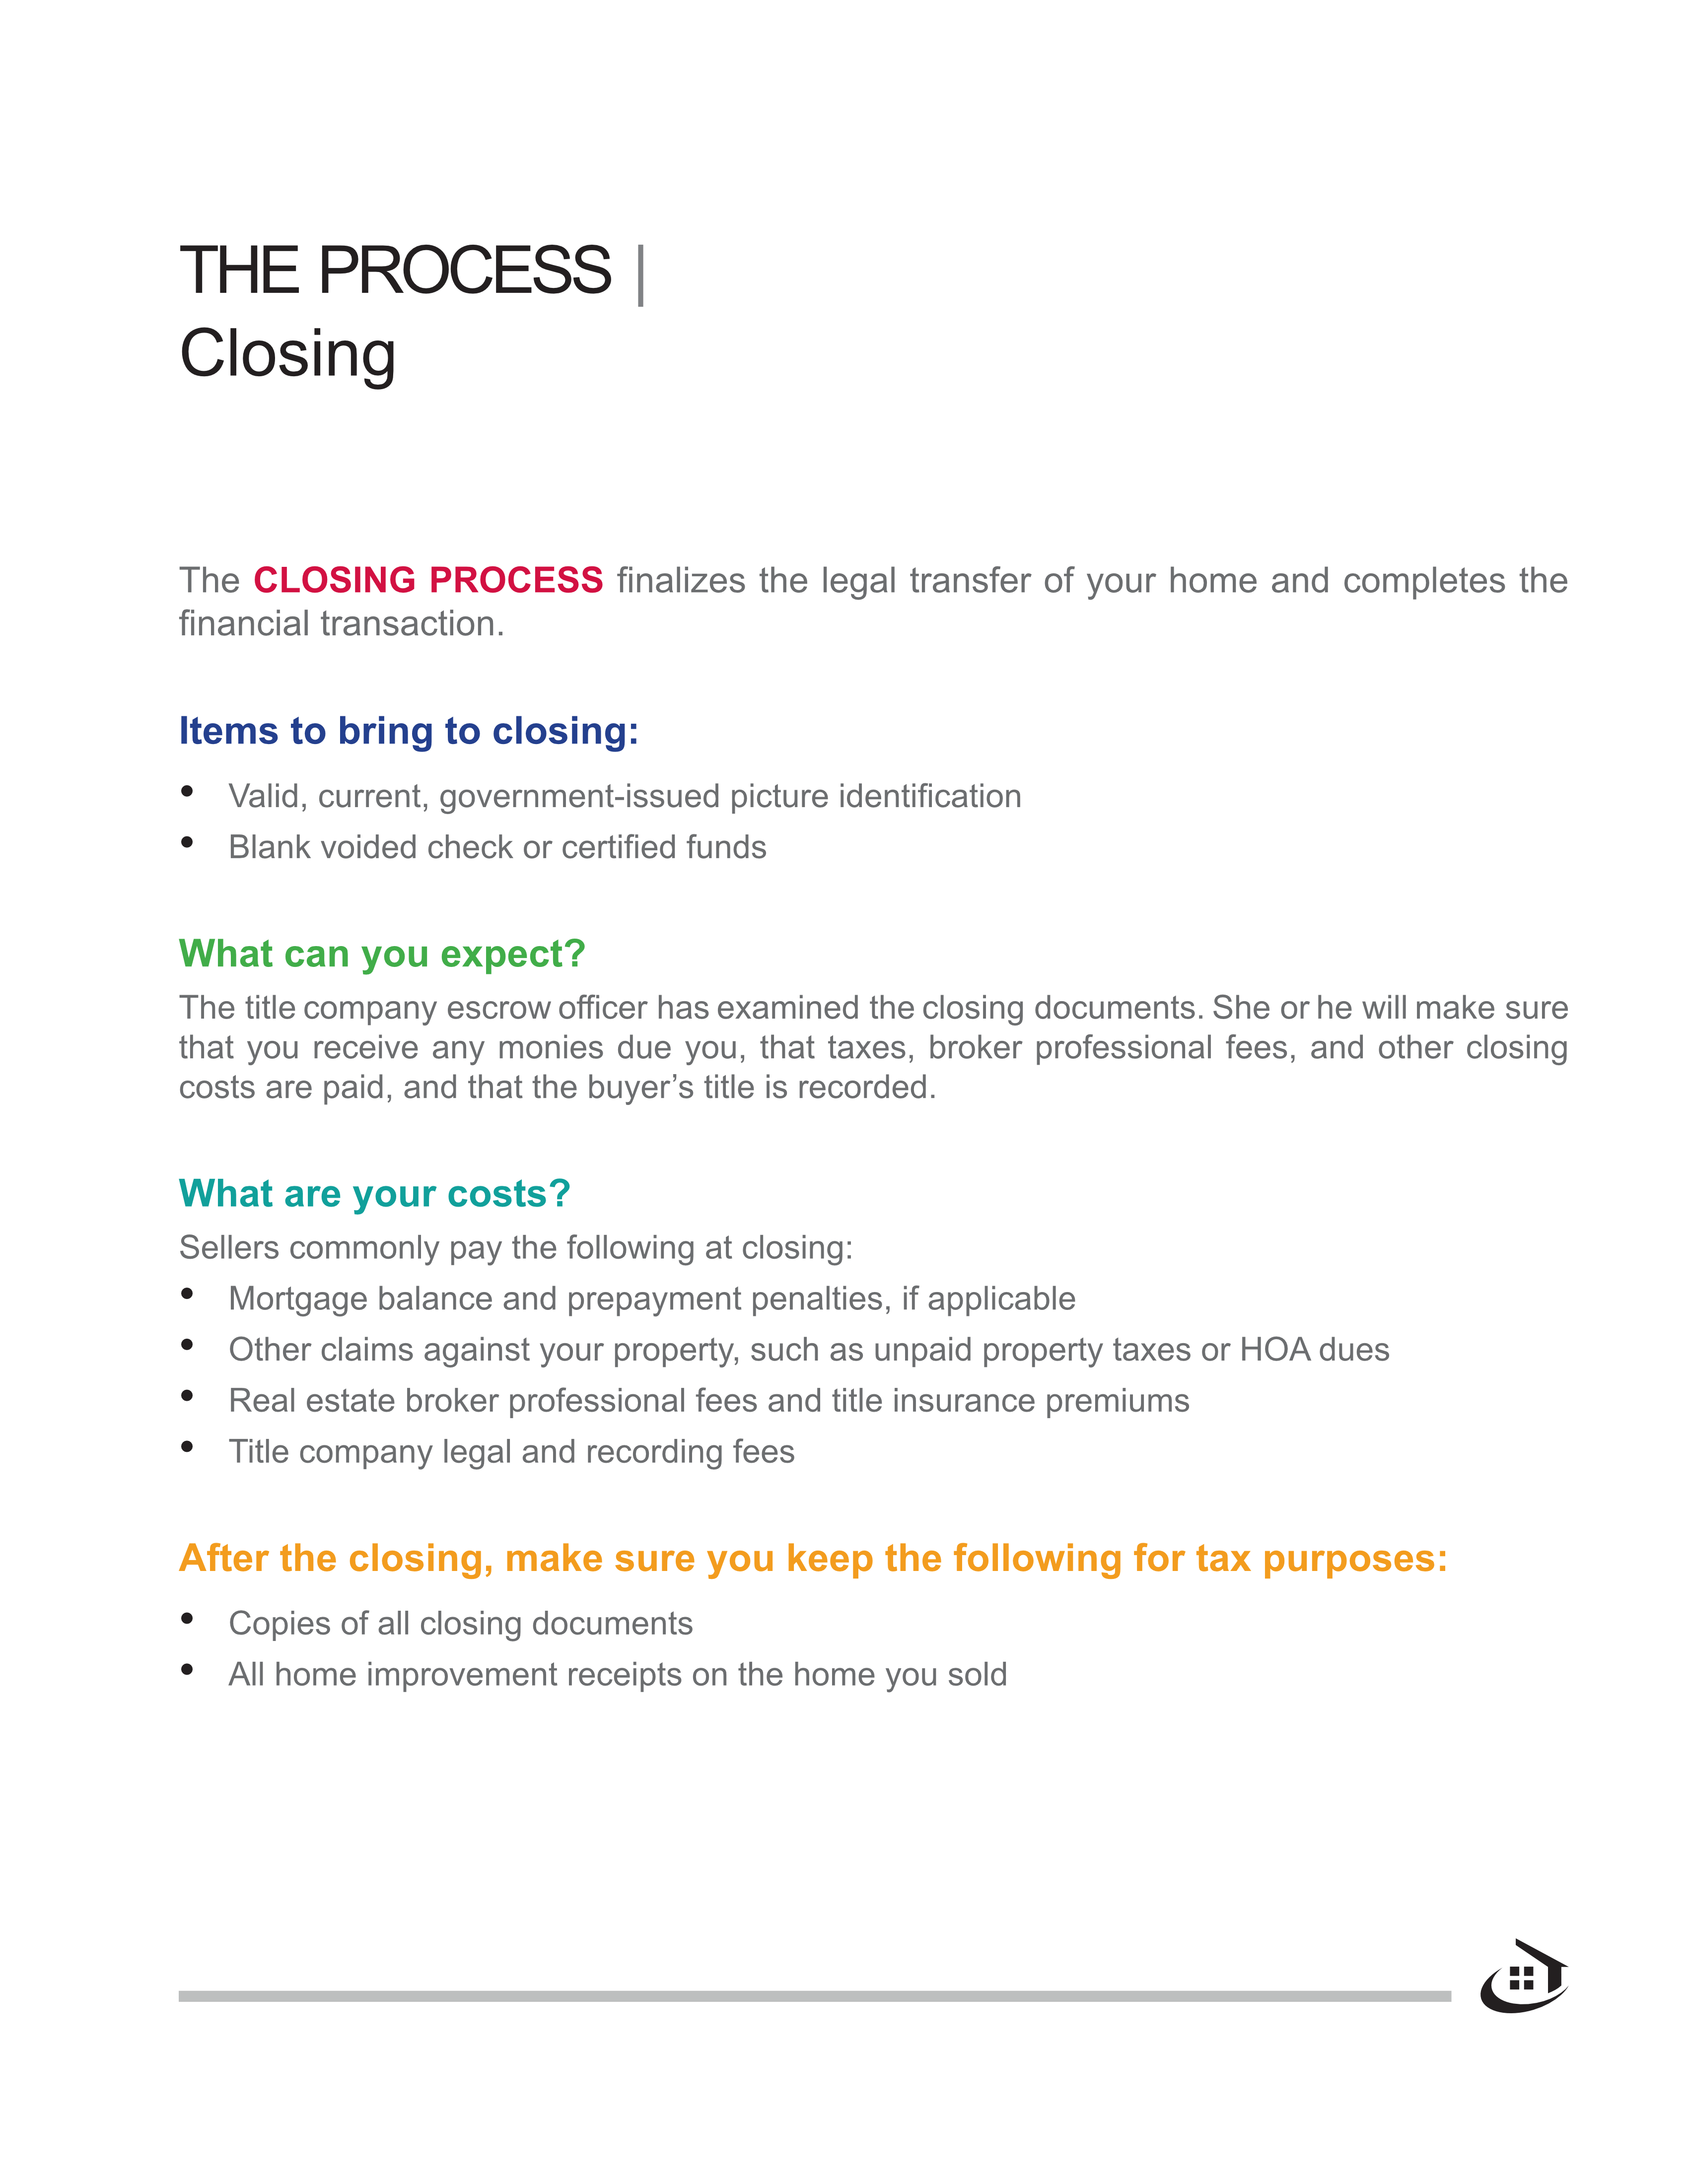 The Selling Process7-Close